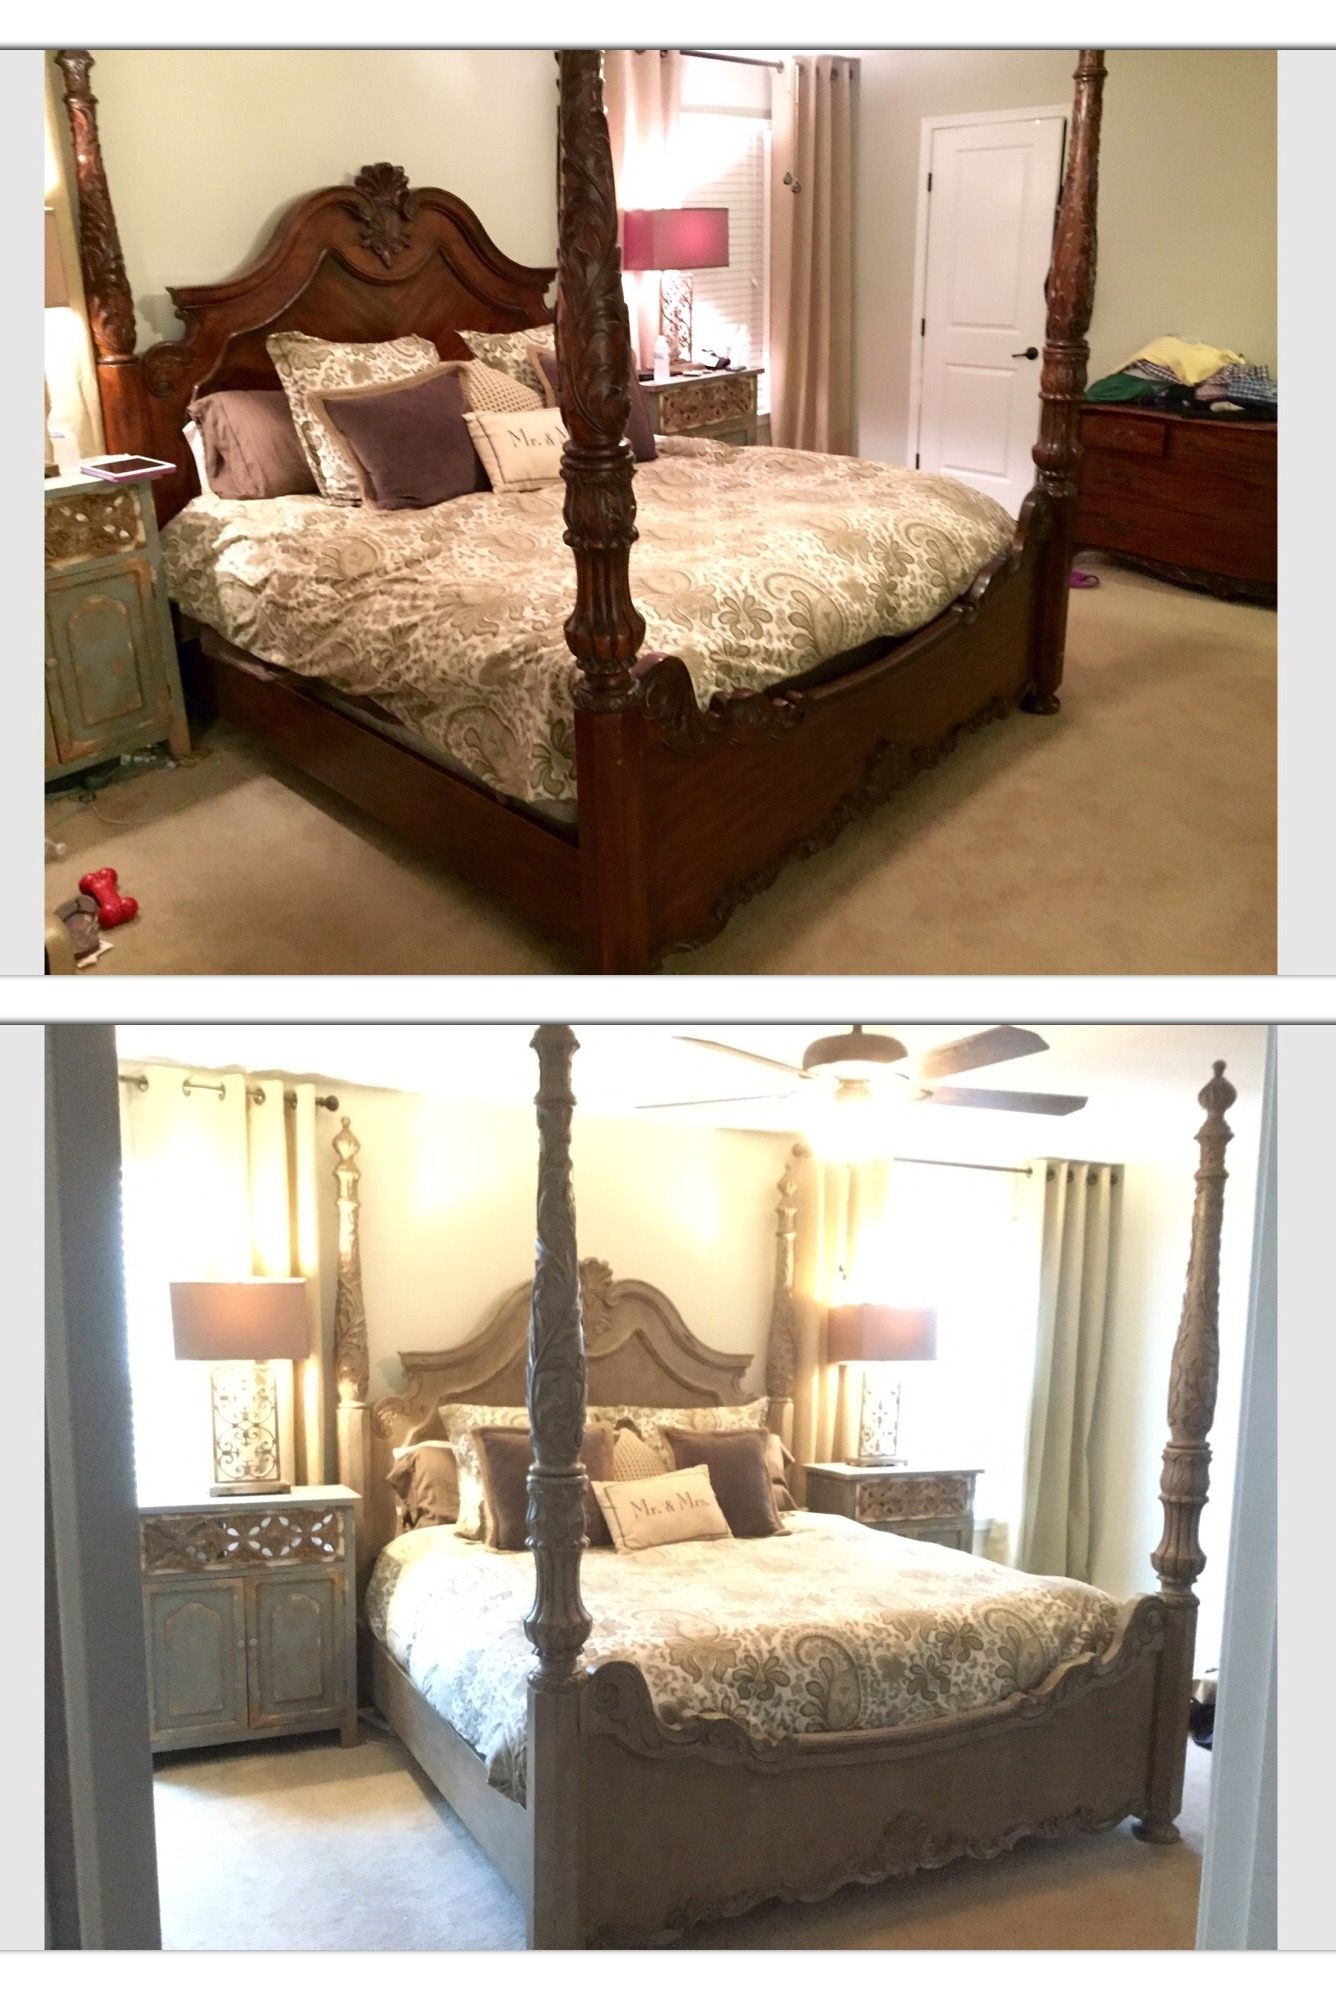 Chalk Painted Bedroom Furniture
 Poster king bed frame redo Painted with Annie Sloan chalk